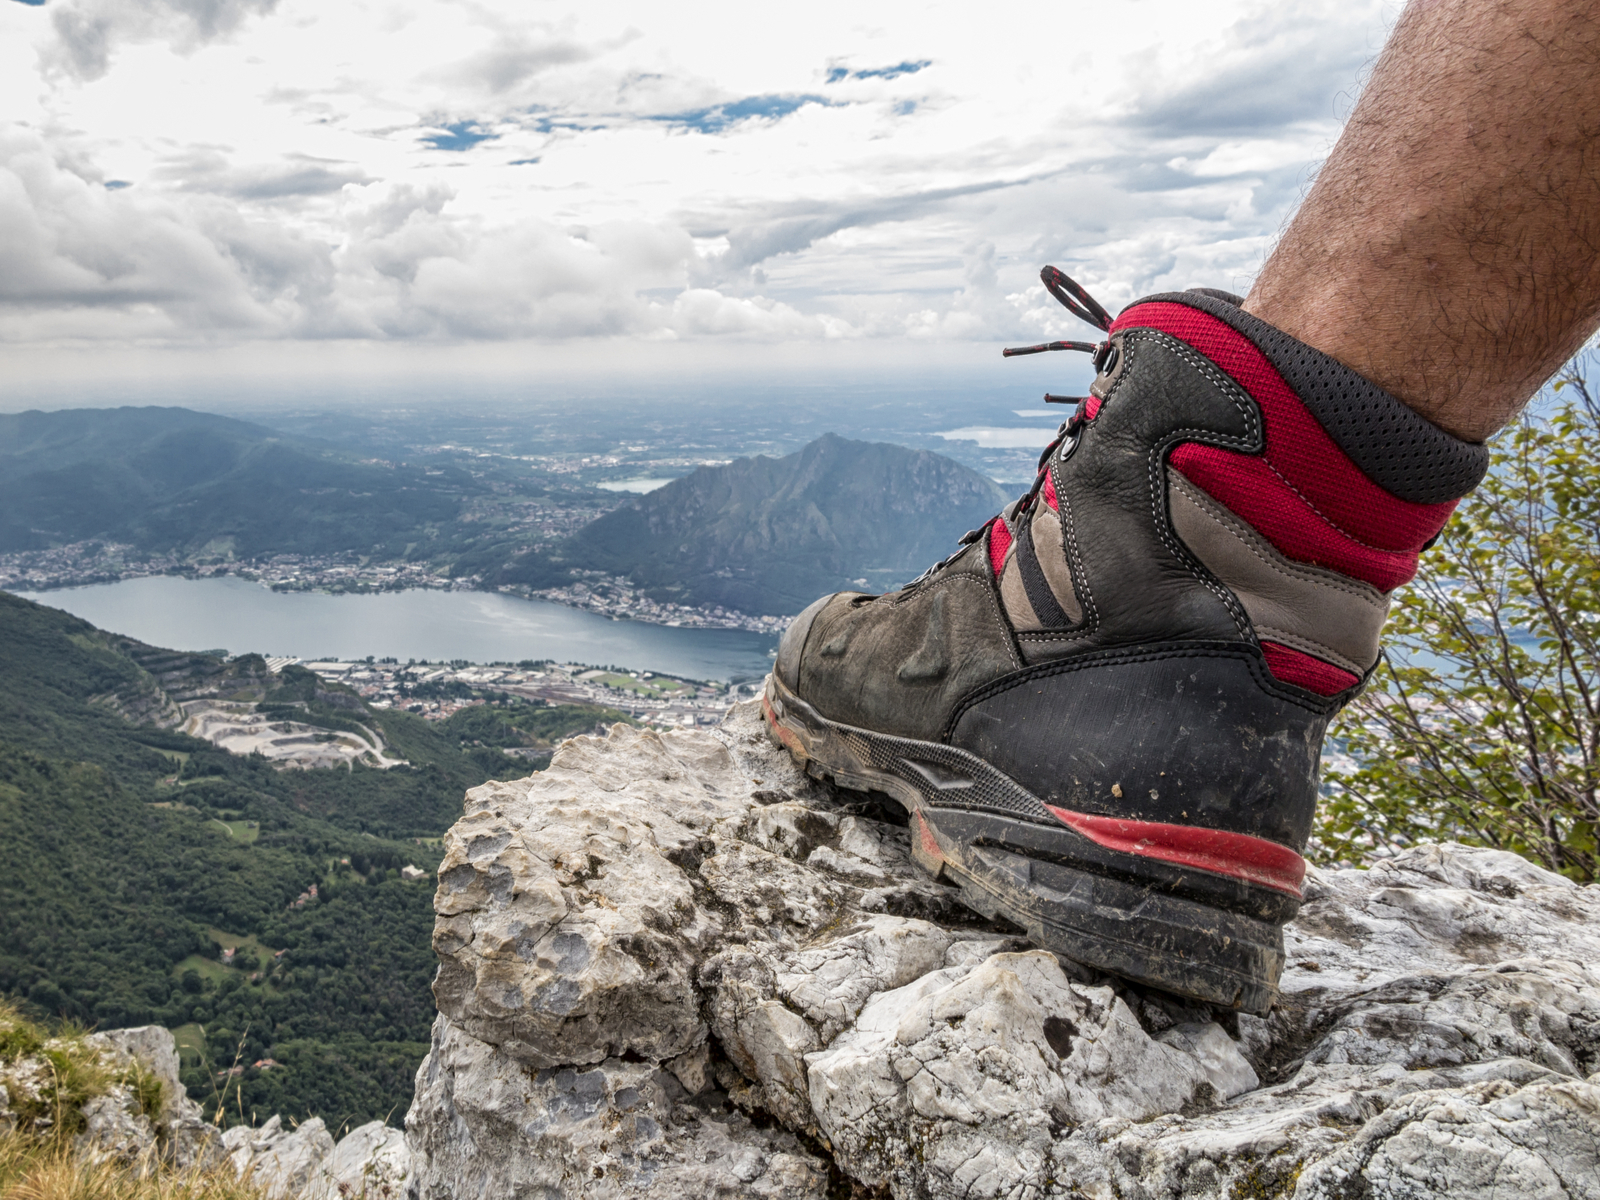 Guy wearing a pair of the best hiking boots while putting his foot on the rocks on a mountain